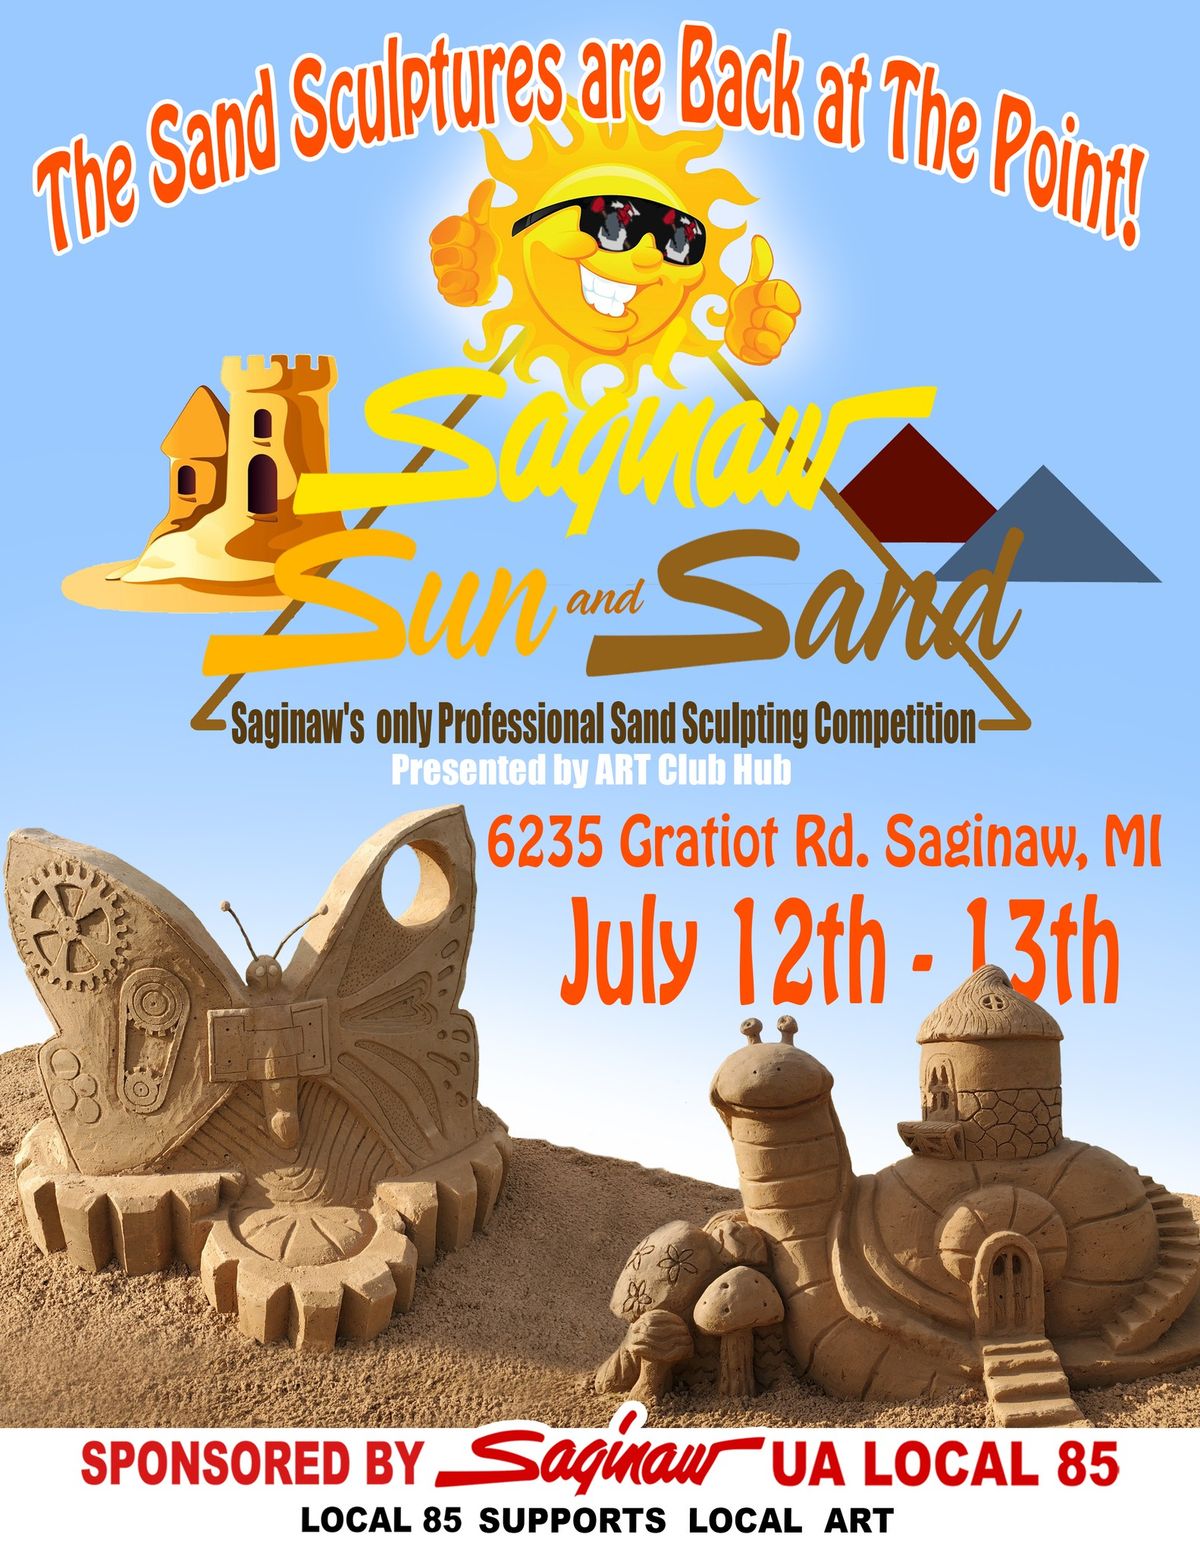 SAGINAW, SUN and SAND Professional Sand Carving Competition